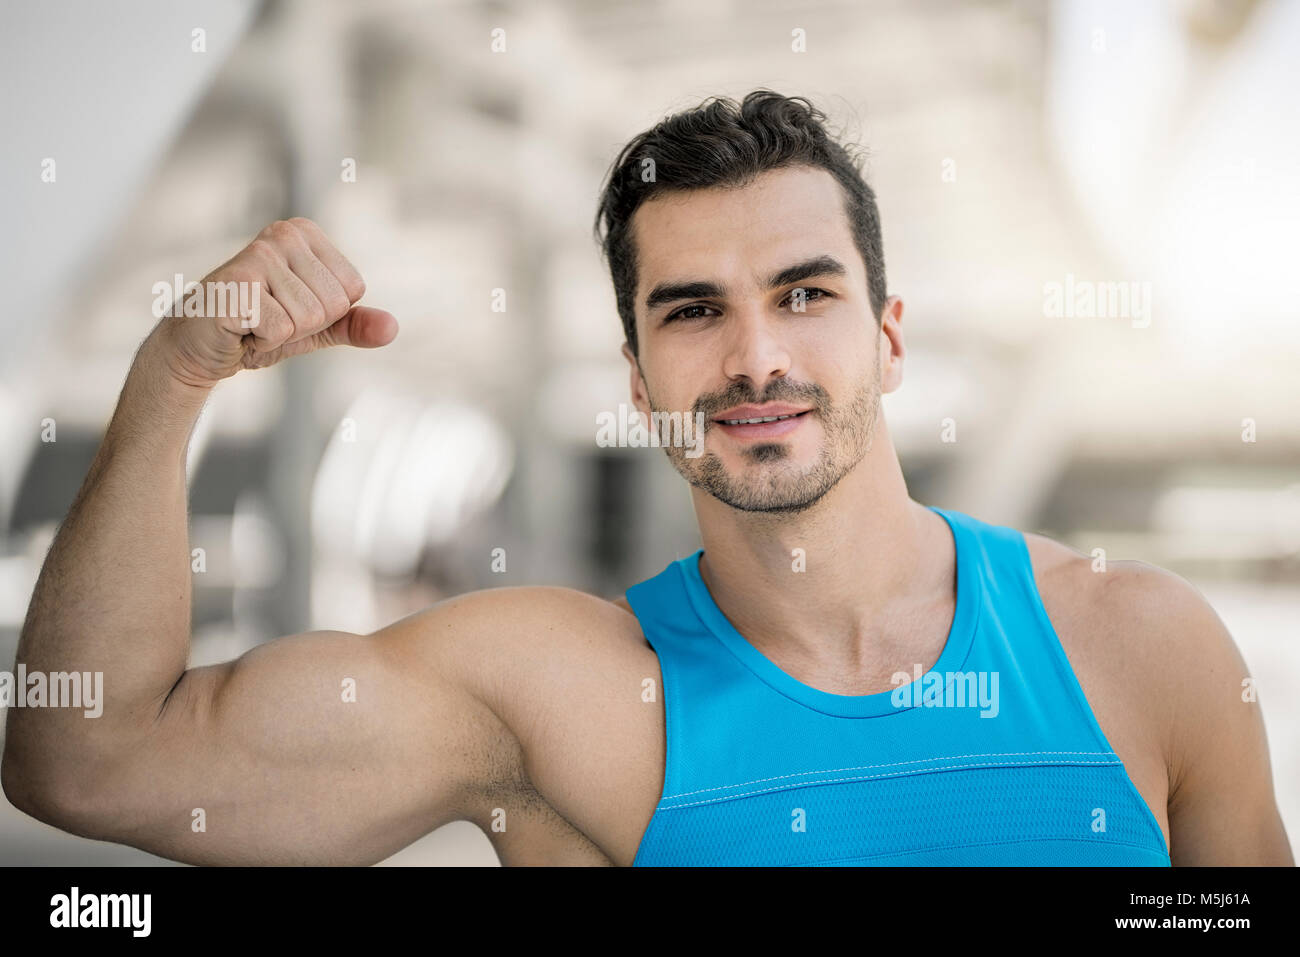 Portrait of man training in the city, flexing muscles Stock Photo